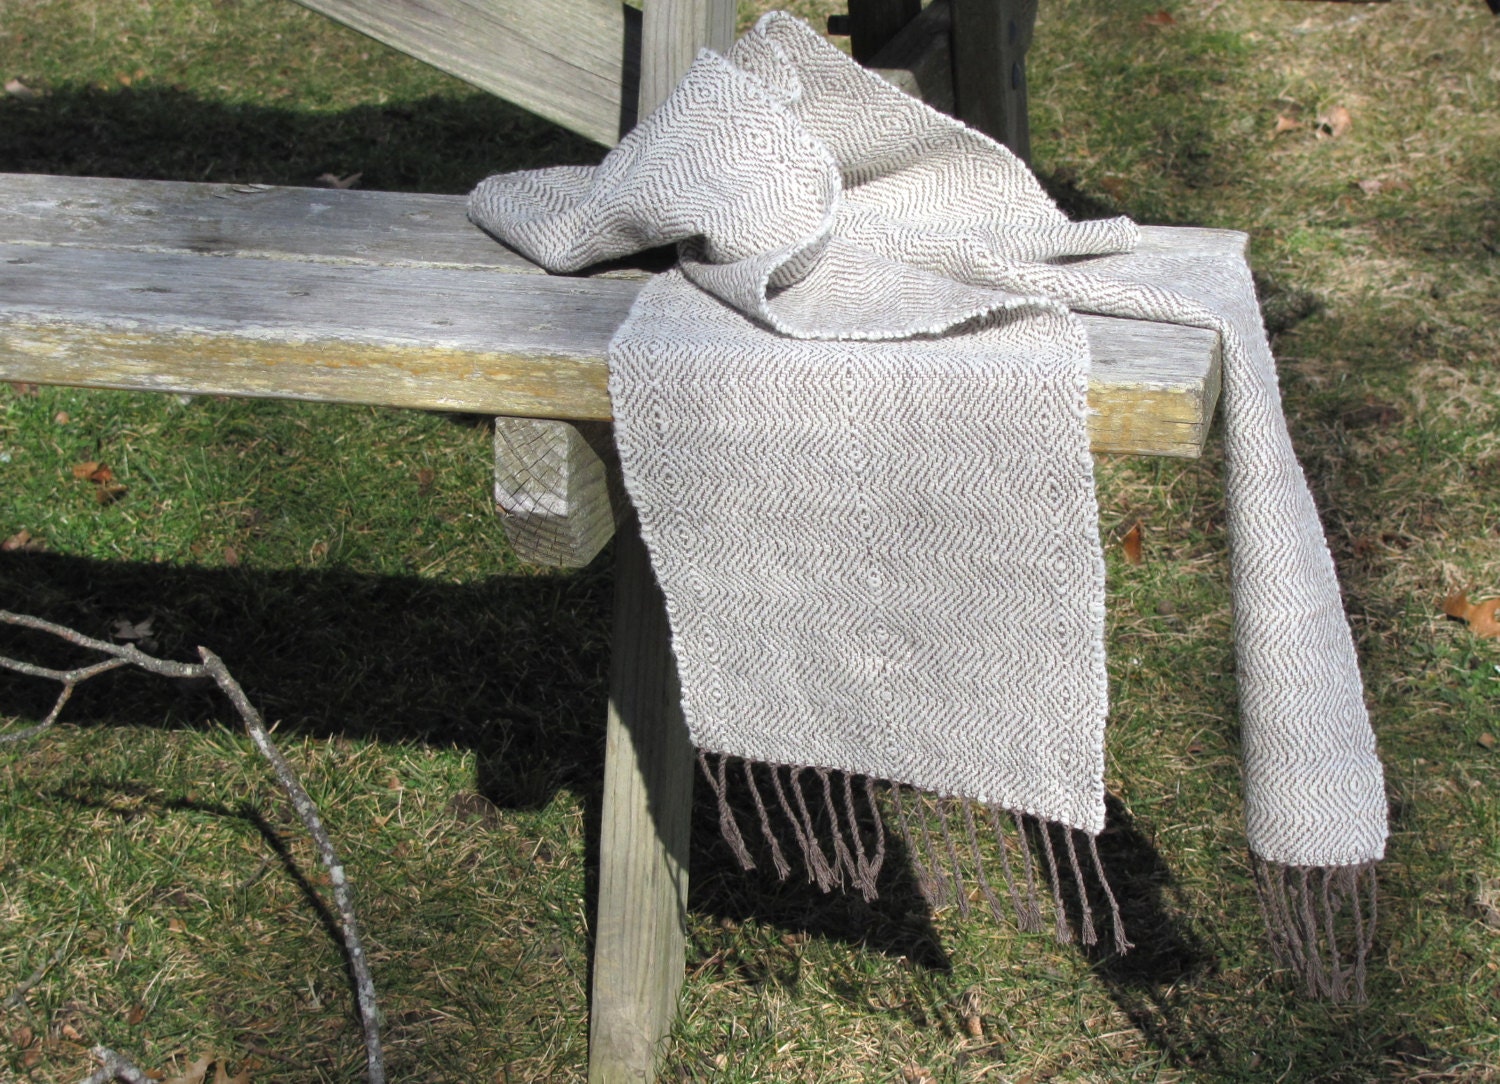 Artisan Hand Woven Wool Cotton Blend Scarf, Mens Womens Natural White Gray Brown Rustic Country Cabin Fall Winter Clothing Accessory Gift